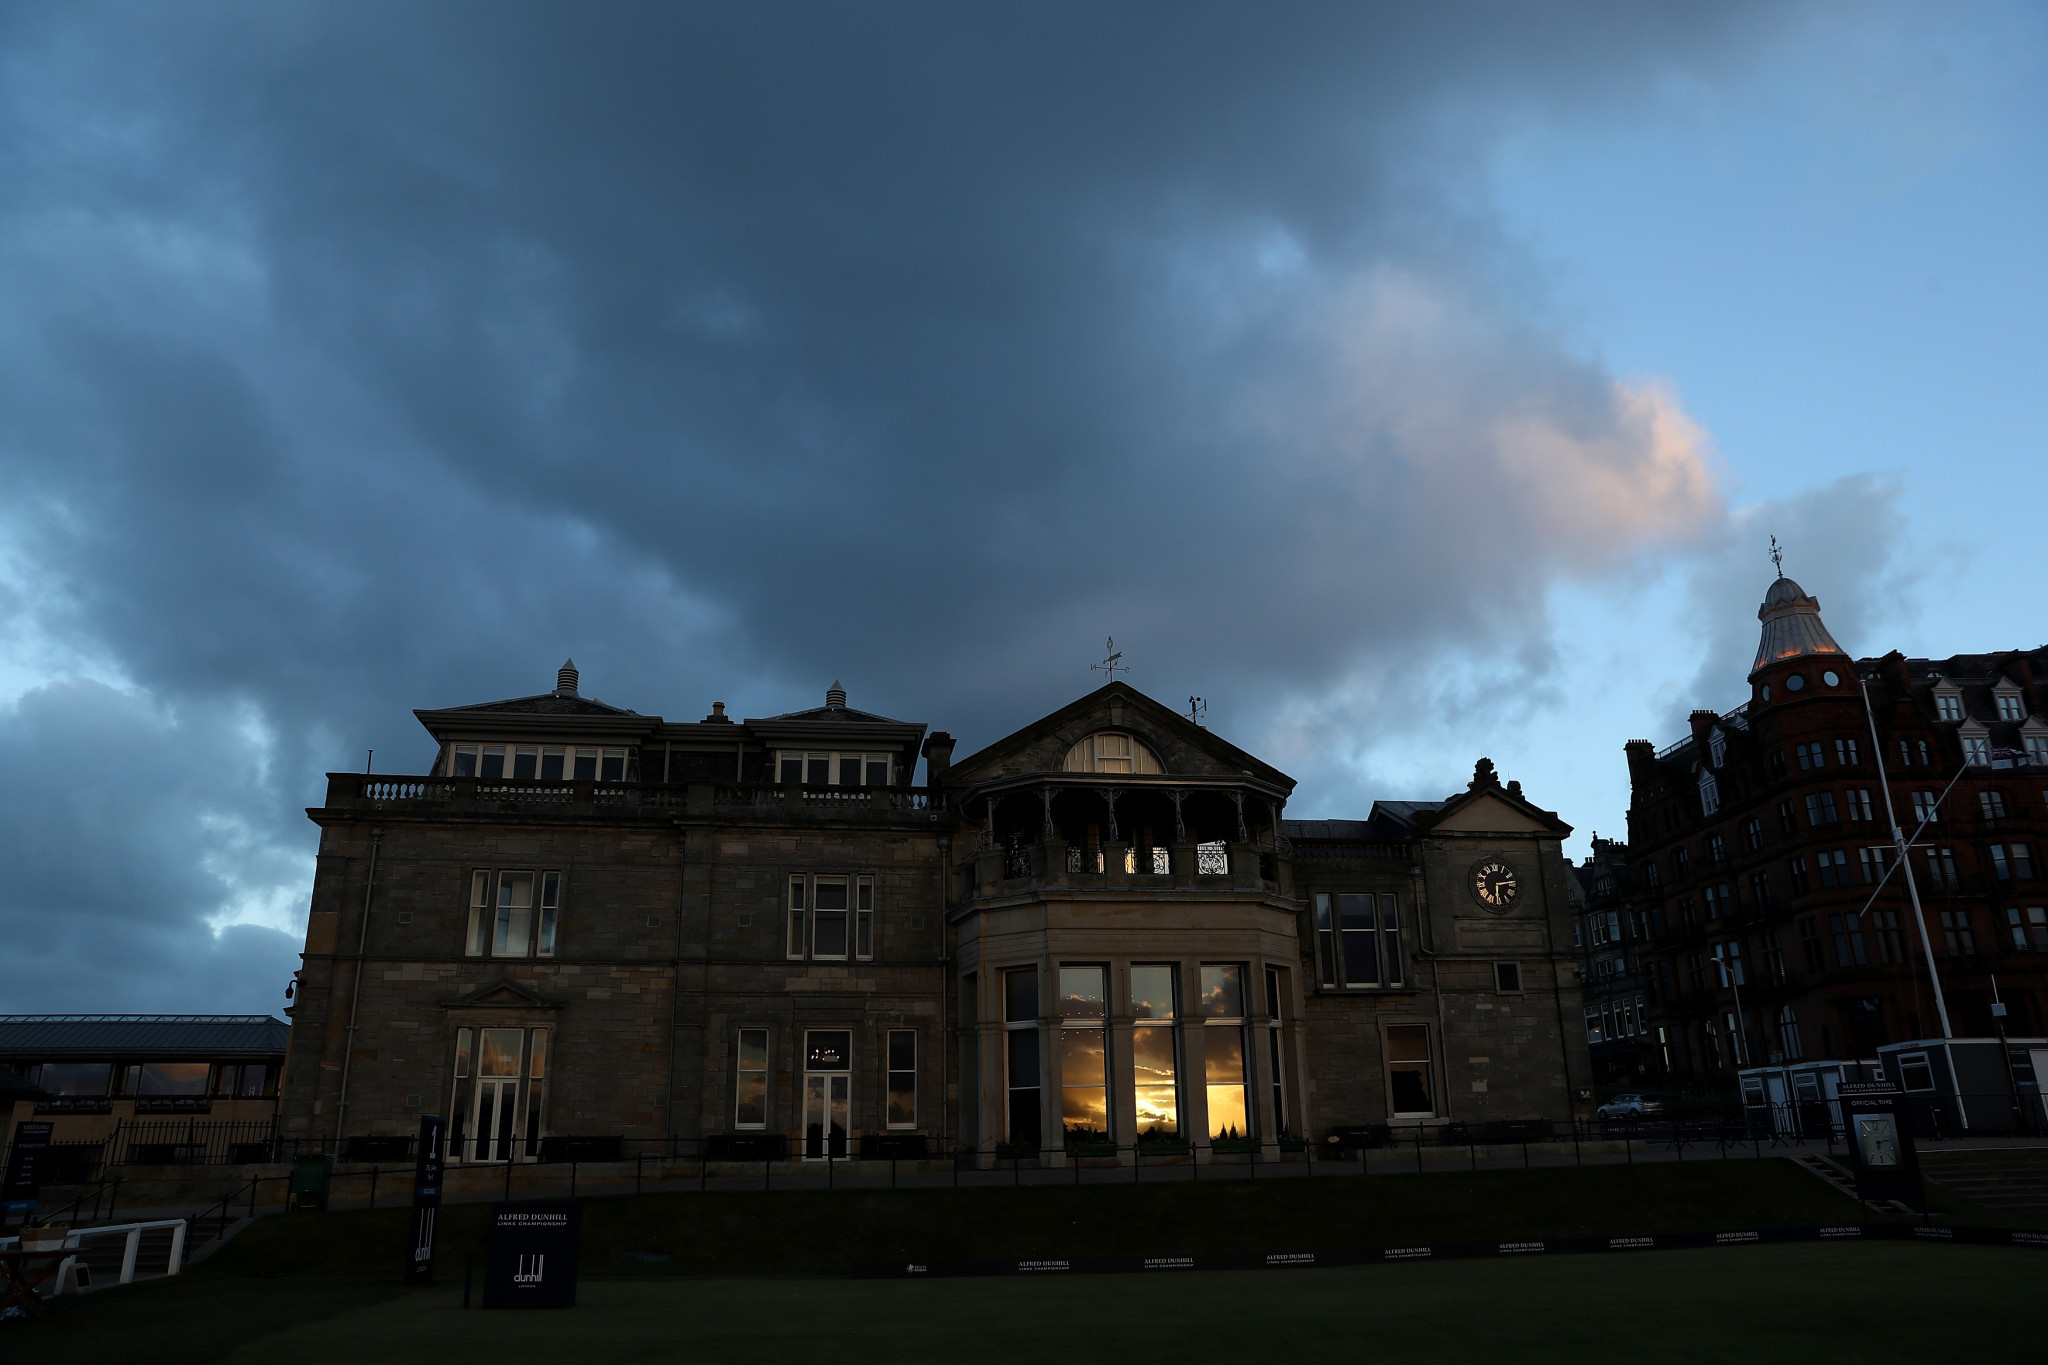 St Andrews is due to stage the 150th Open later this year, one of golf's four majors ©Getty Images